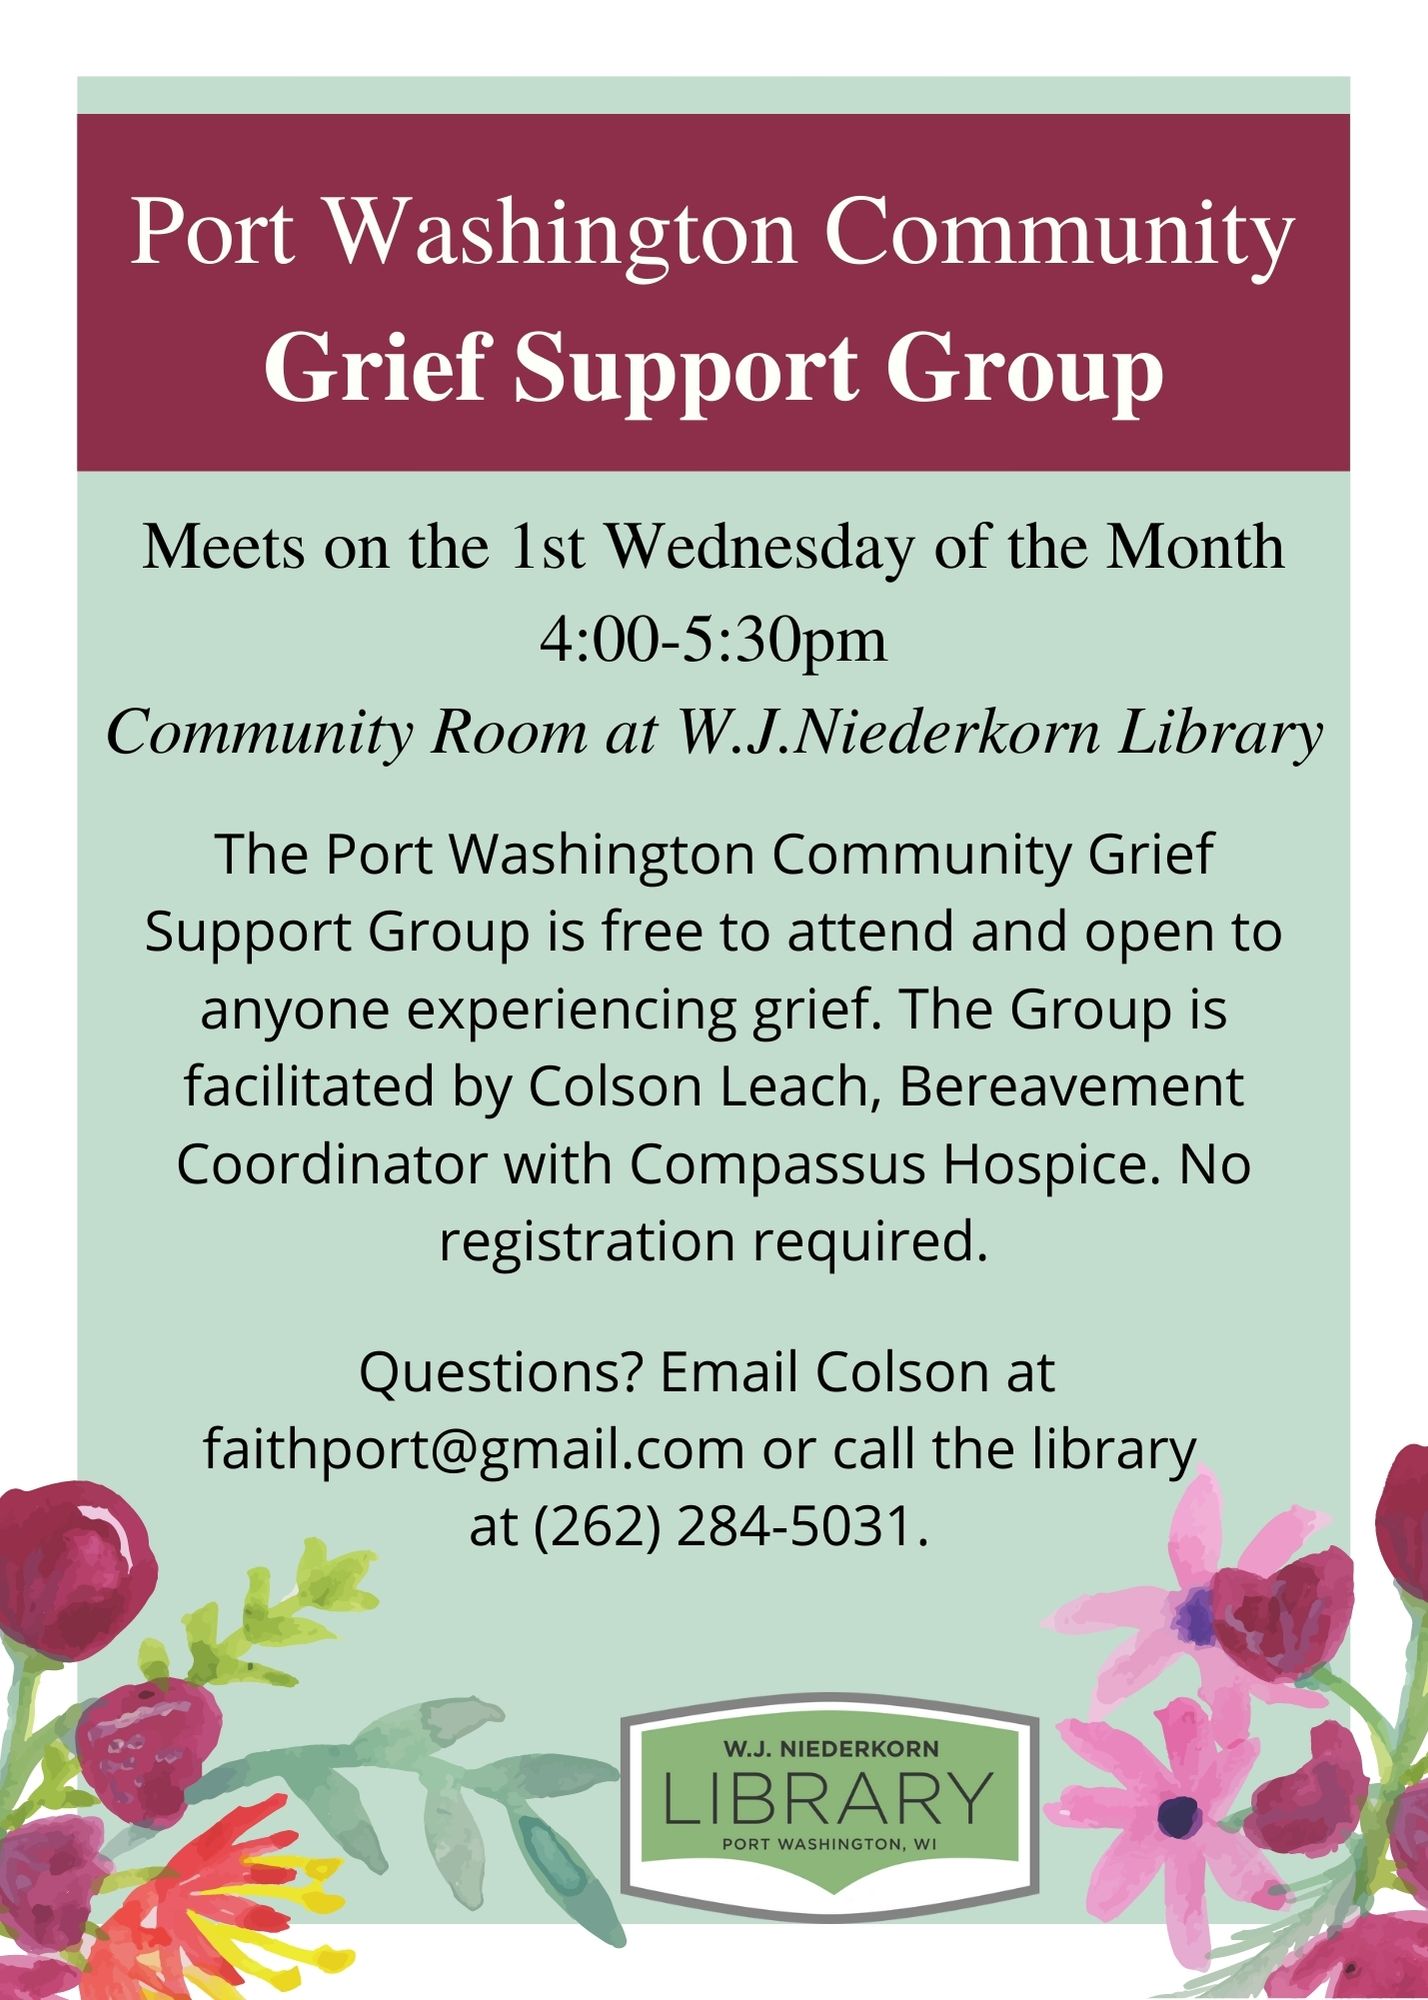 Flyer for Grief Support Group